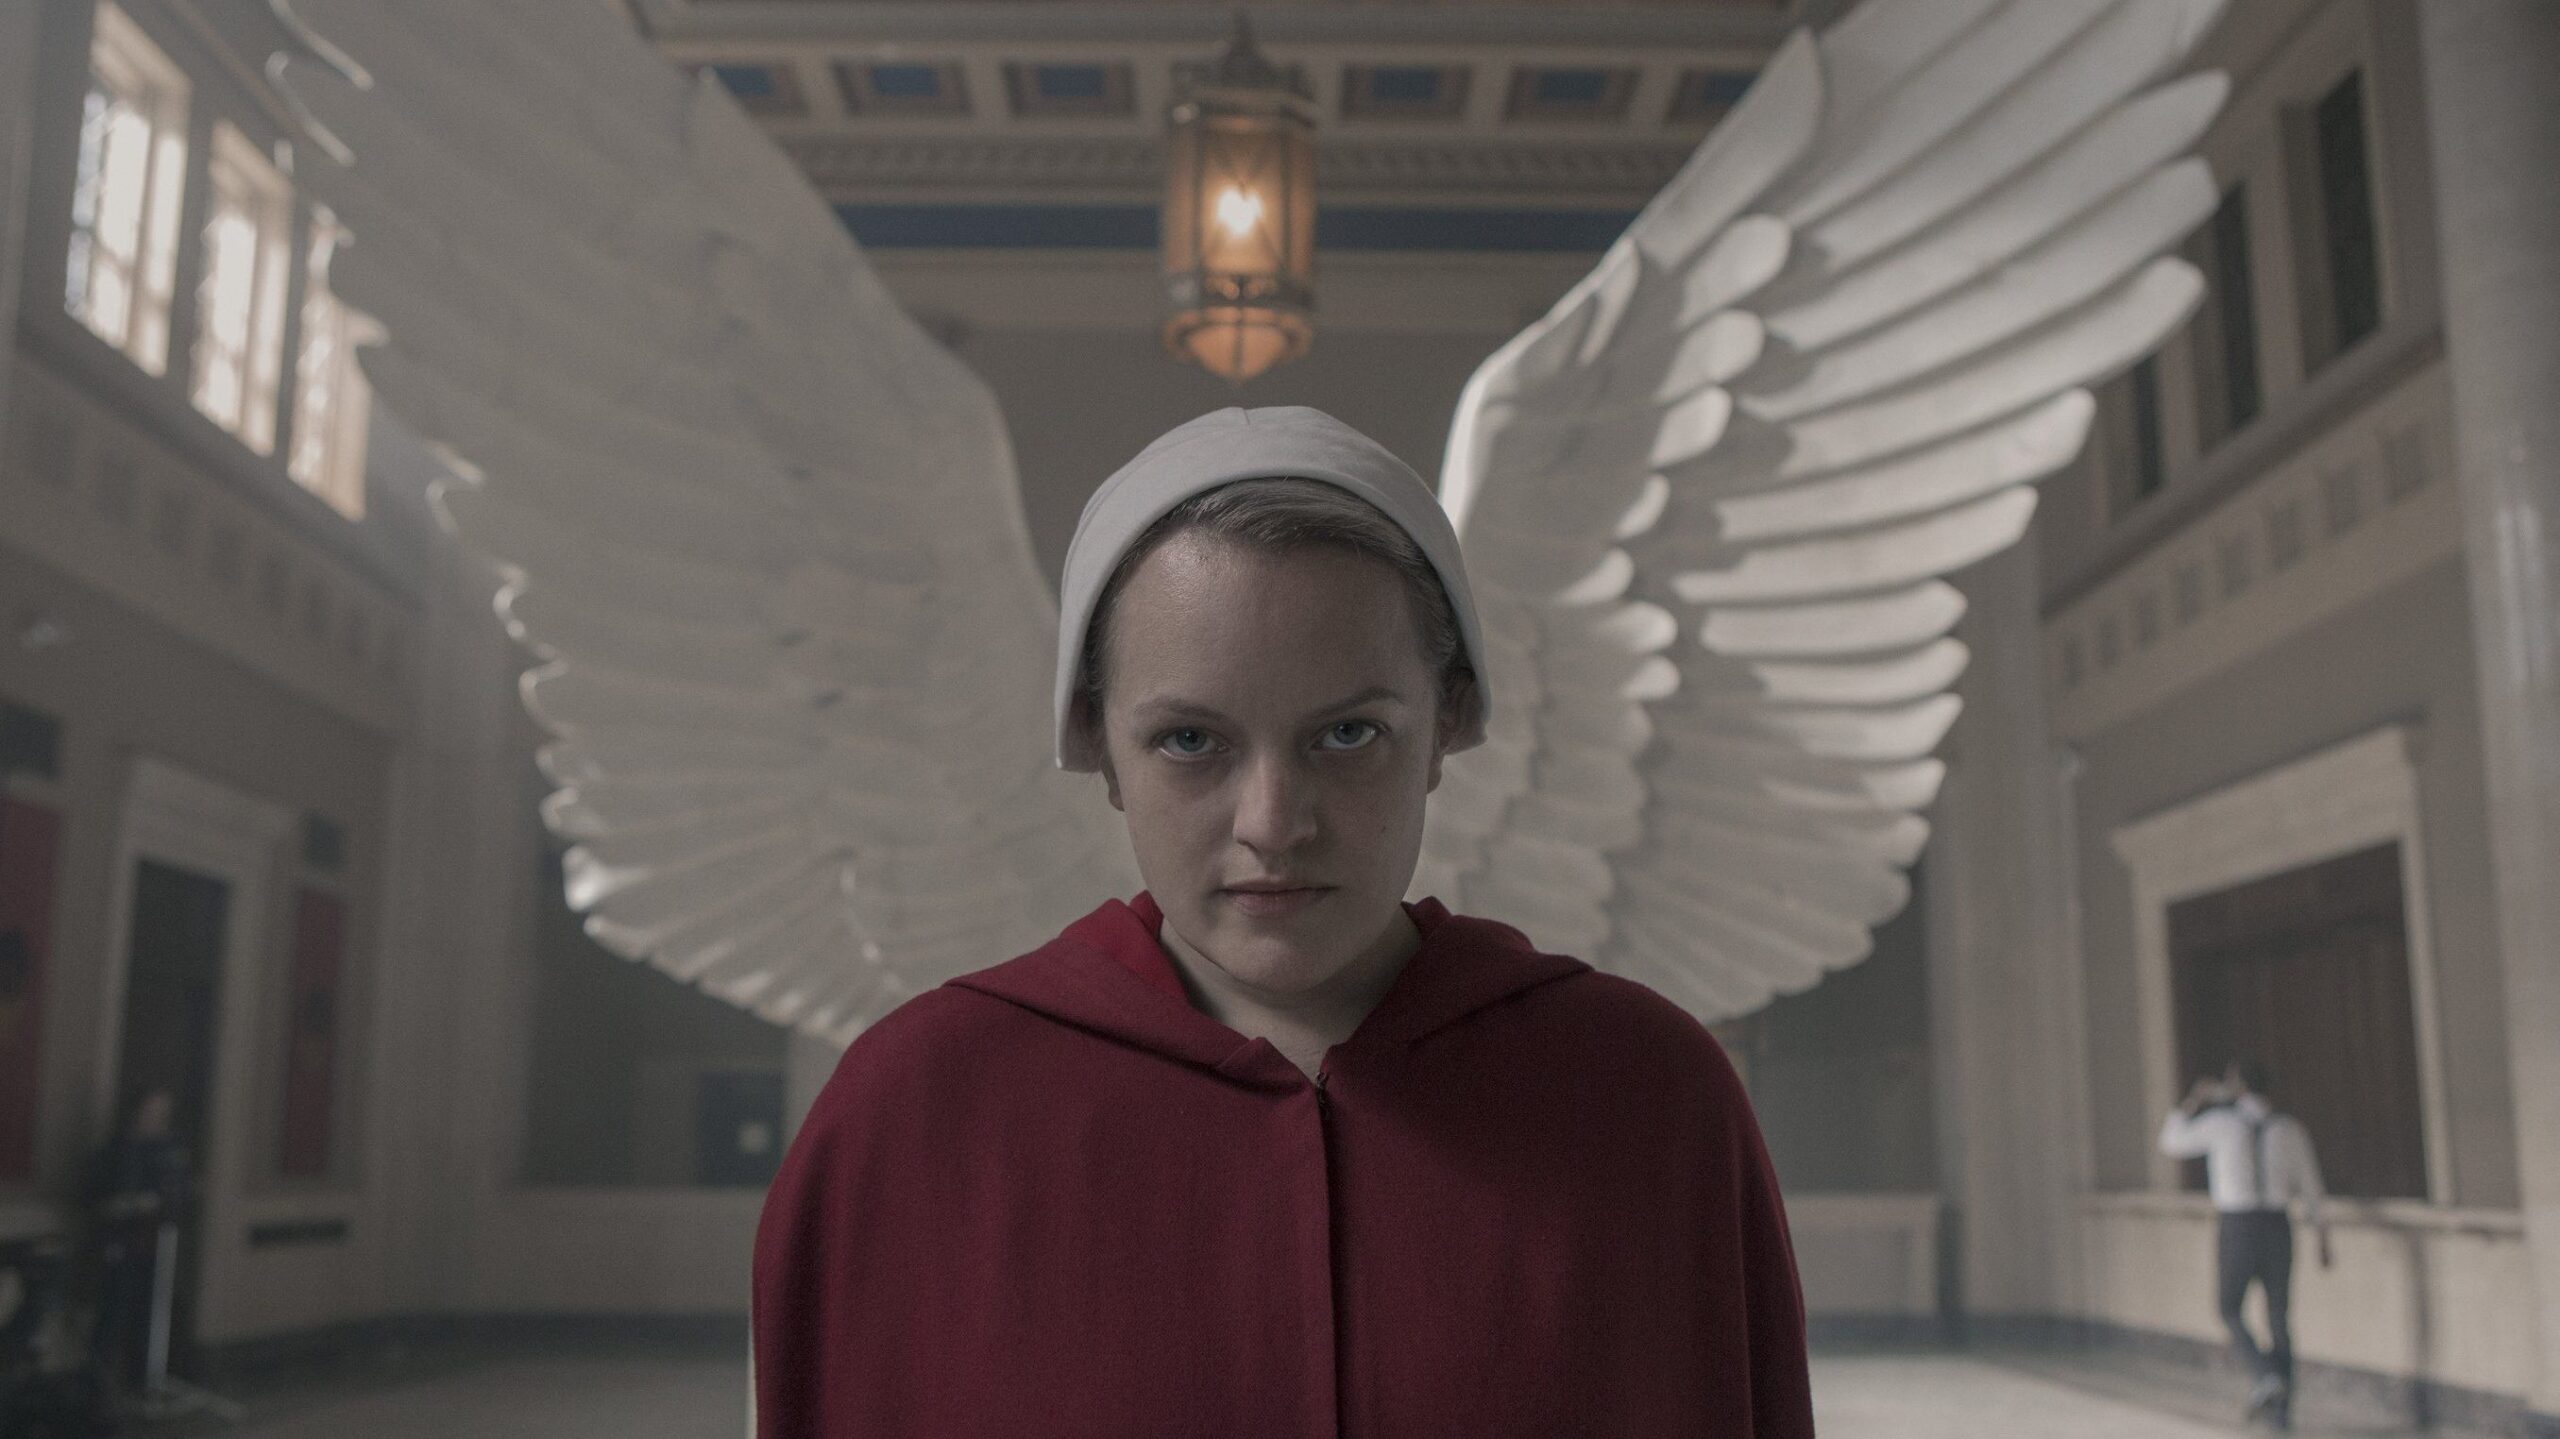 cropped The Handmaids tale scaled